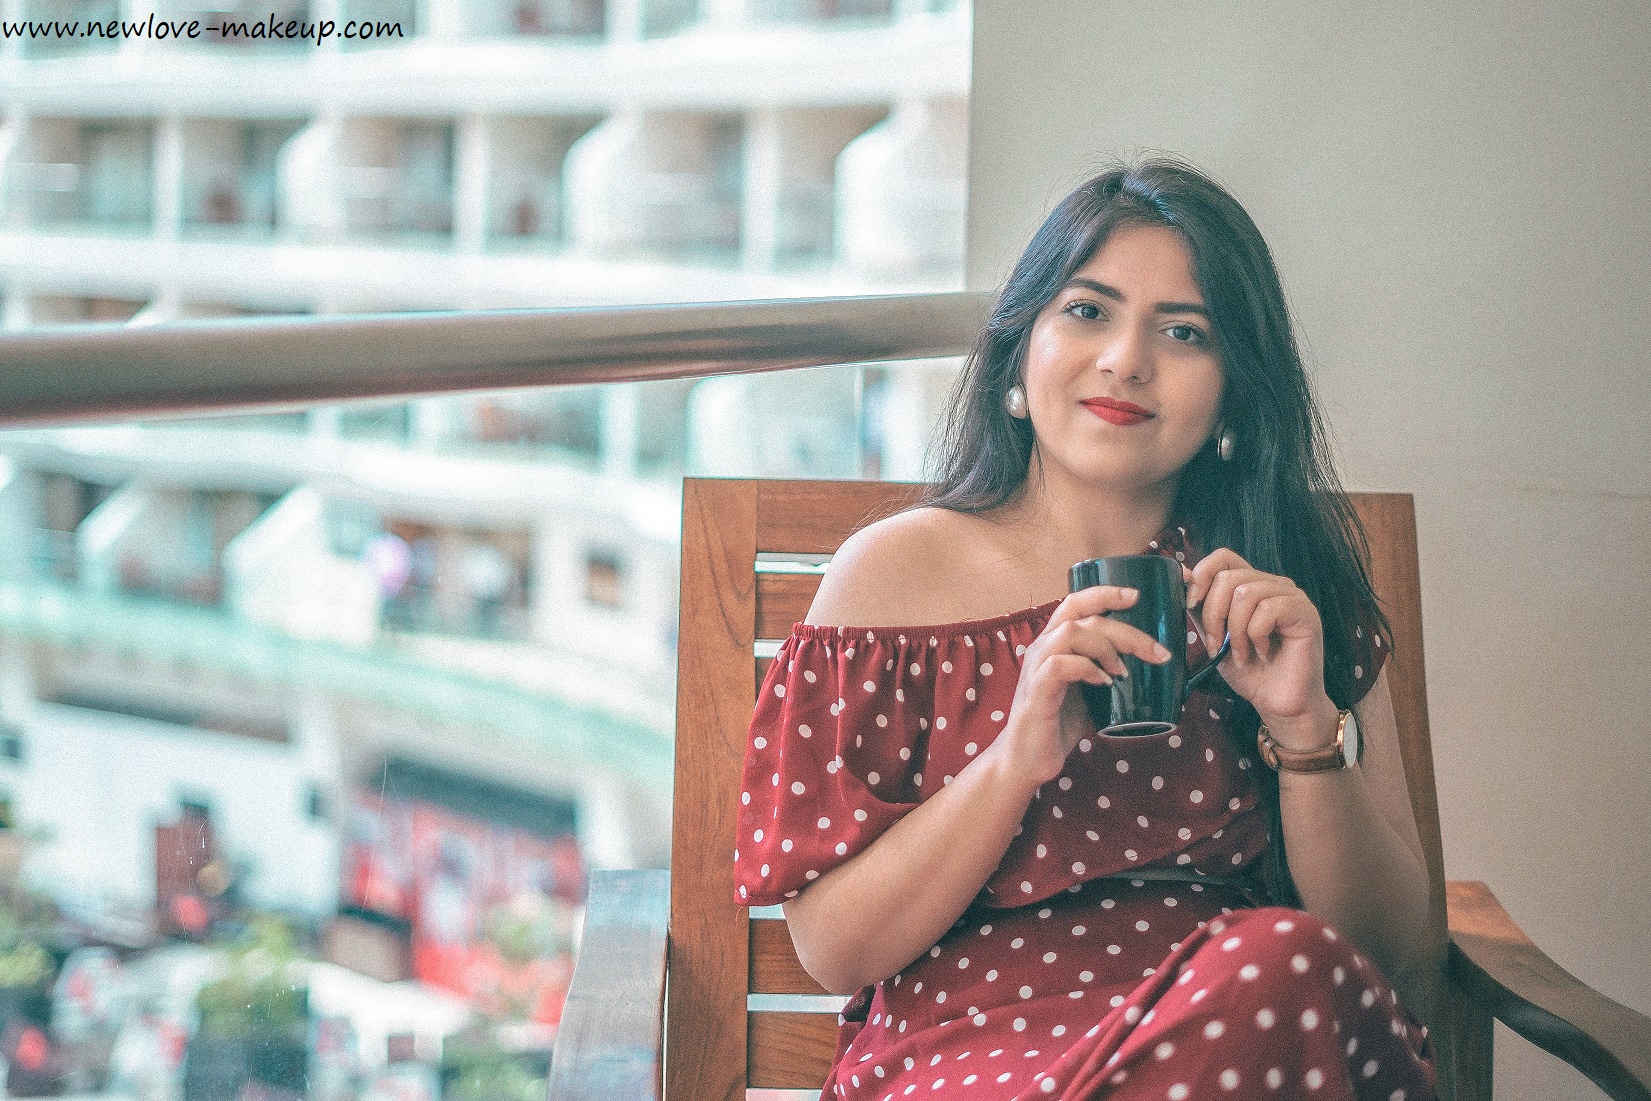 OOTD: Vintage Polka Dots Retro Style Co-ords, Indian Fashion Blog